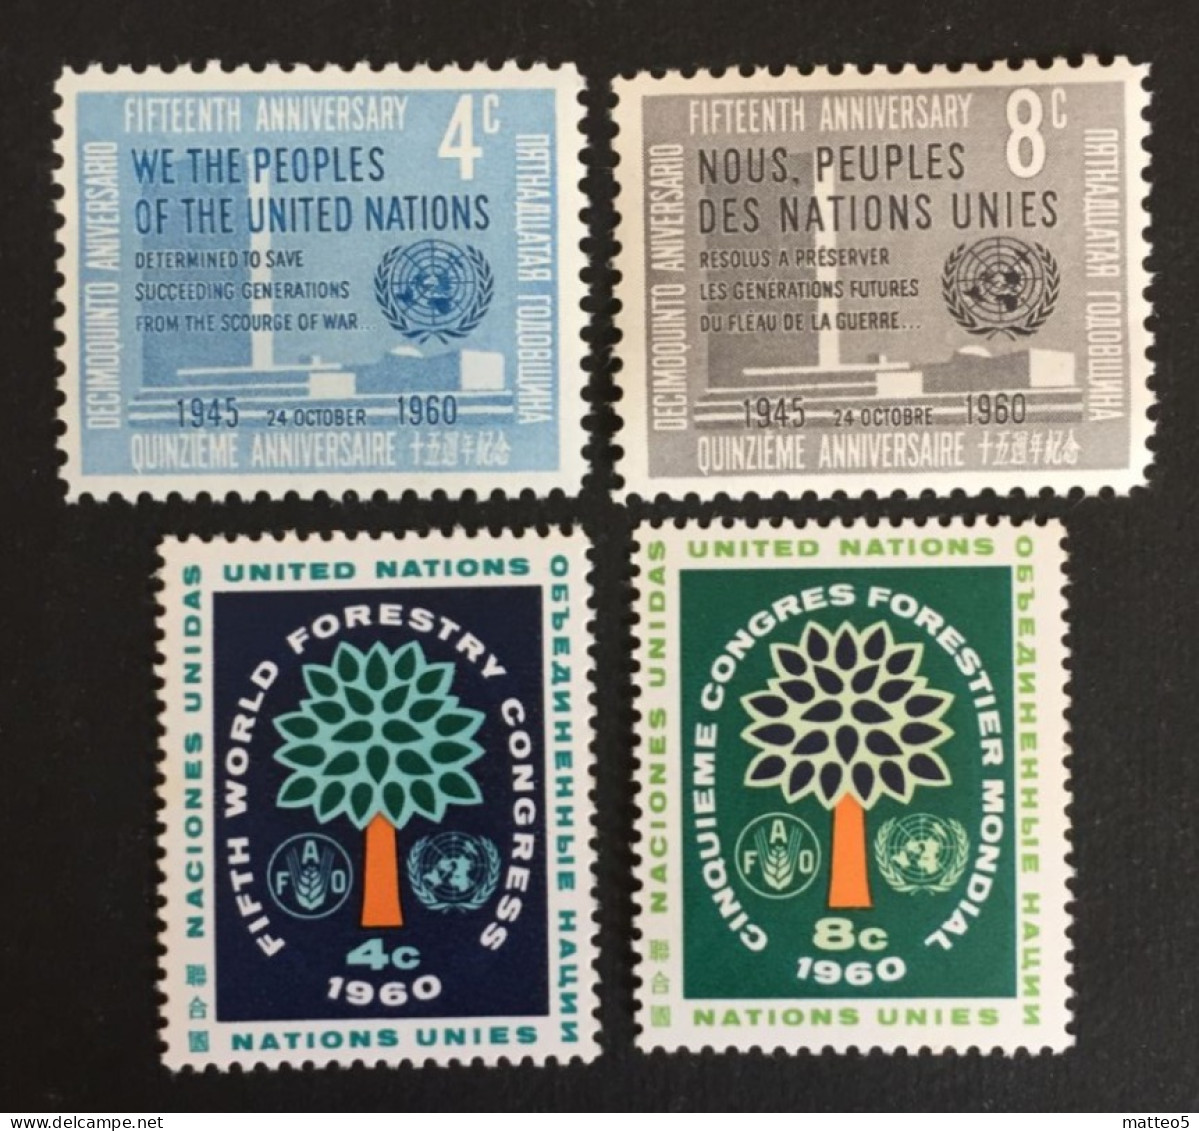 1960 - United Nations UNO UN ONU - World Forestry Congress And UN 15th Anniversary ( We The People) -  Unused - Neufs